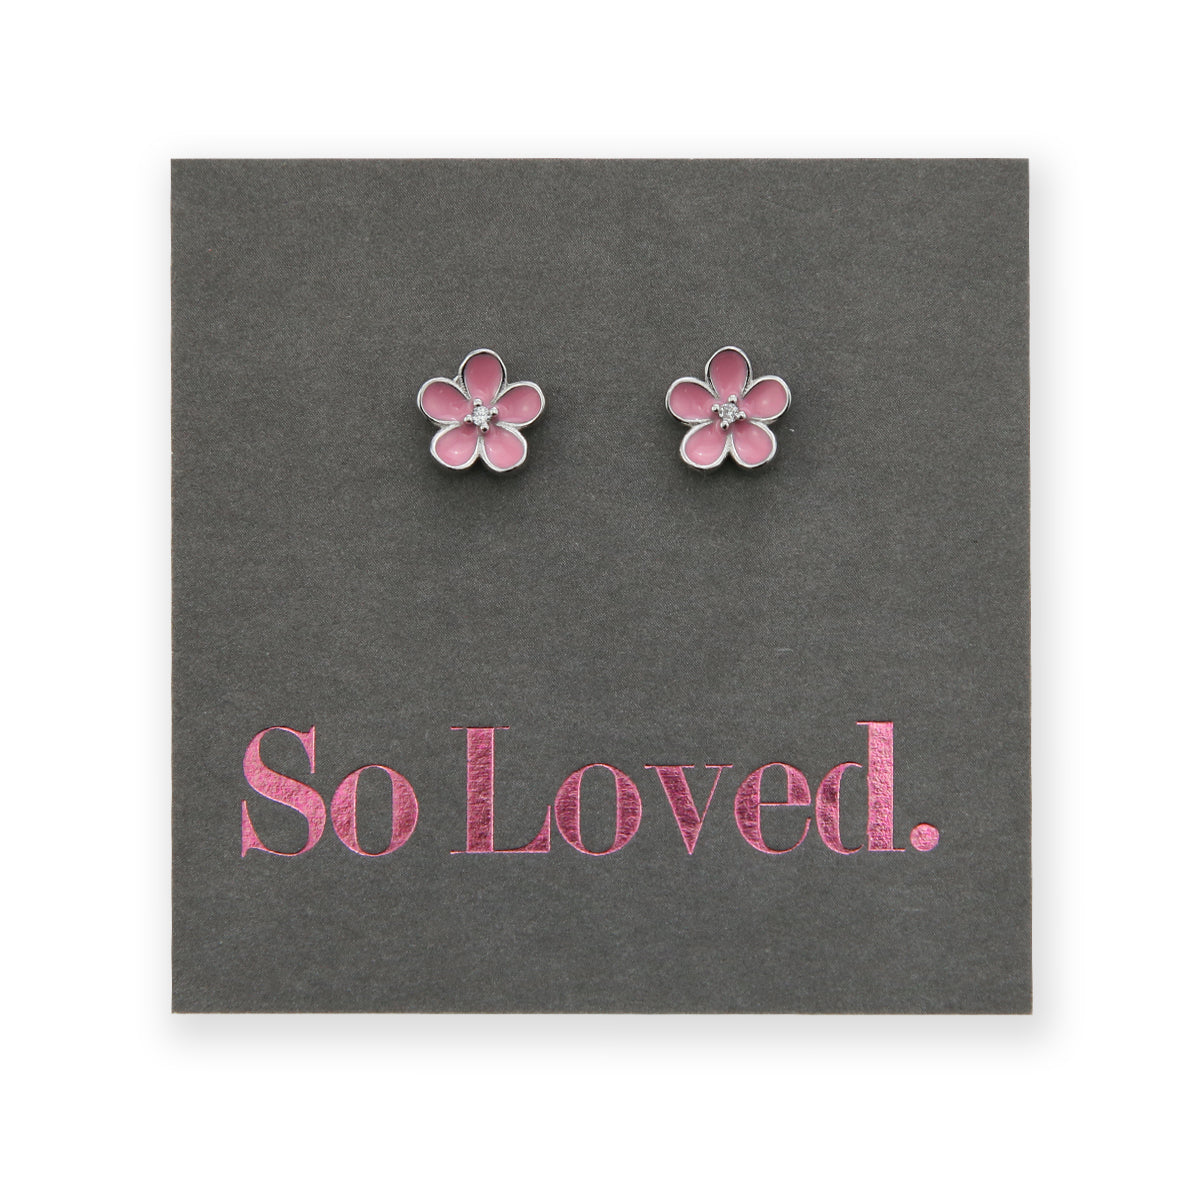 Pink flower studs sterling silver and enamel and cubic zirconia premoum earrings on so loved card, breast cancer fundraiser.